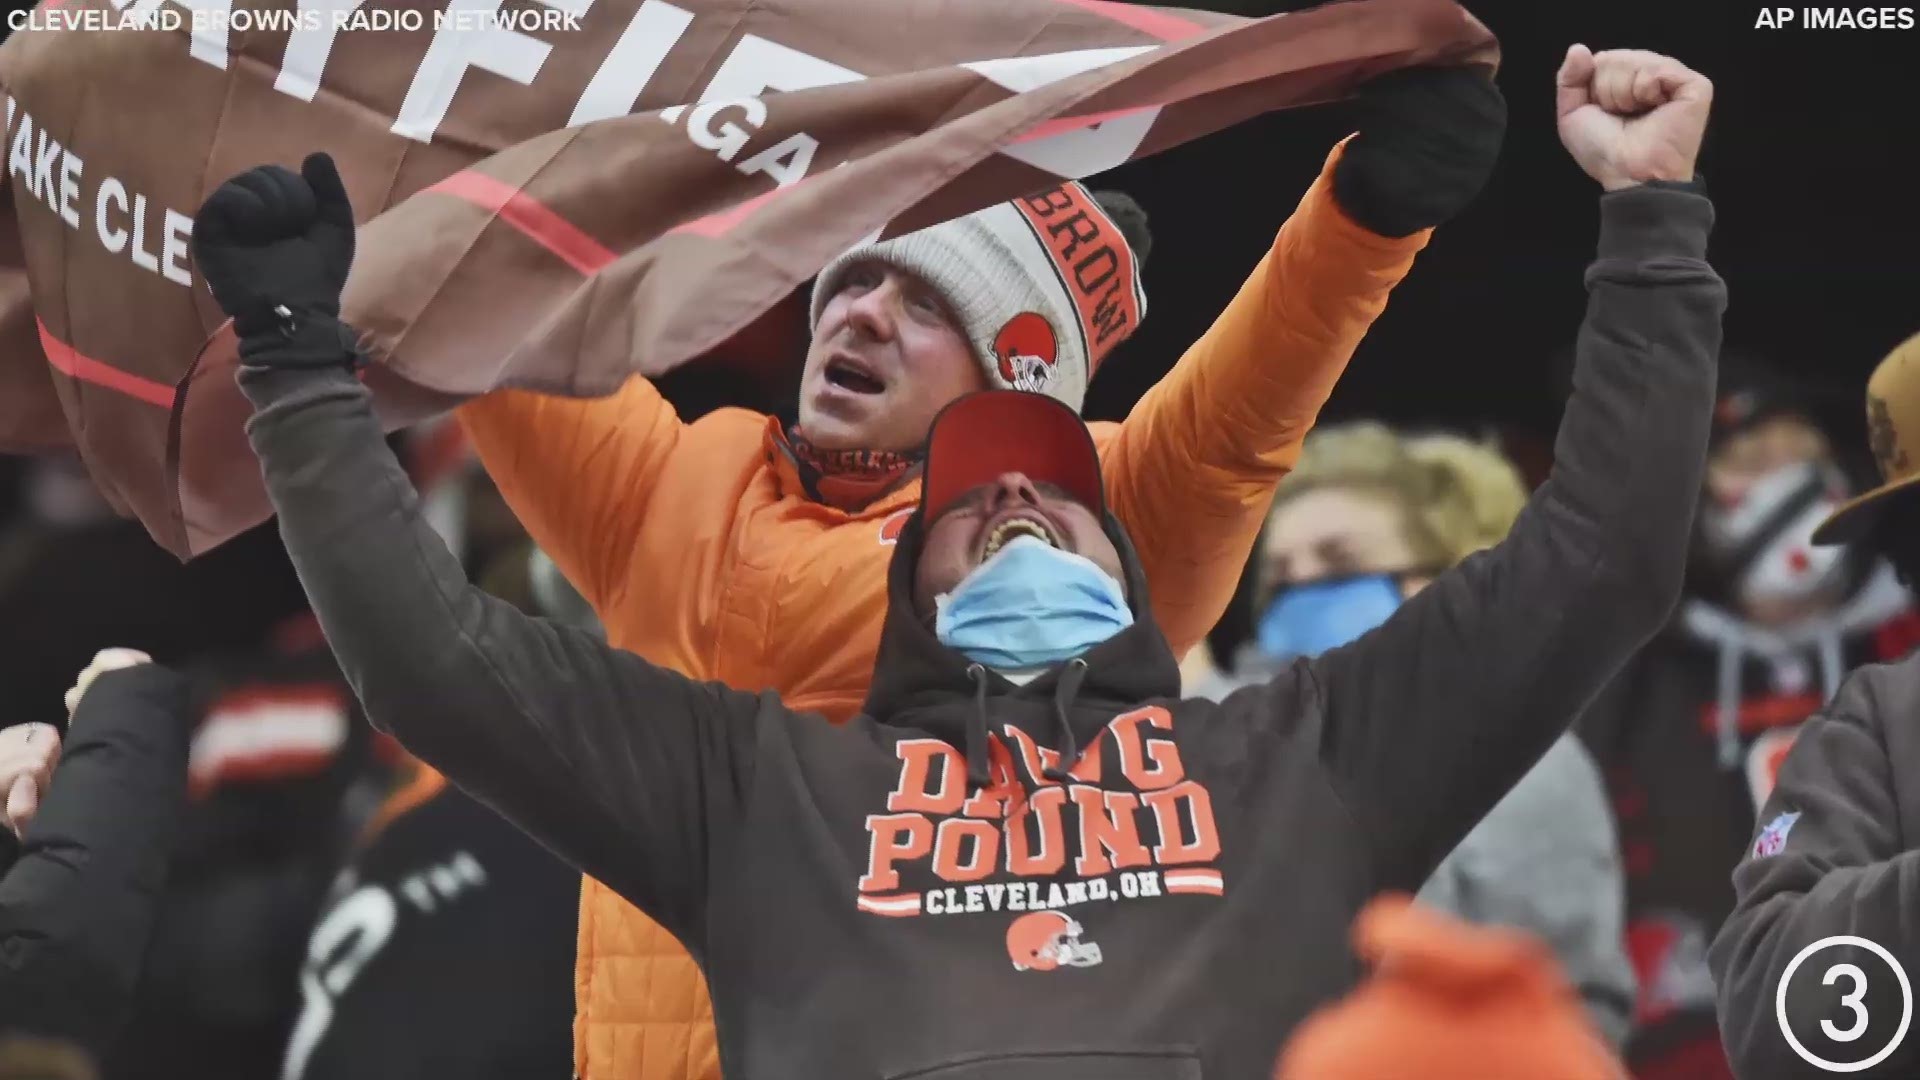 The Cleveland Browns are playoff bound!